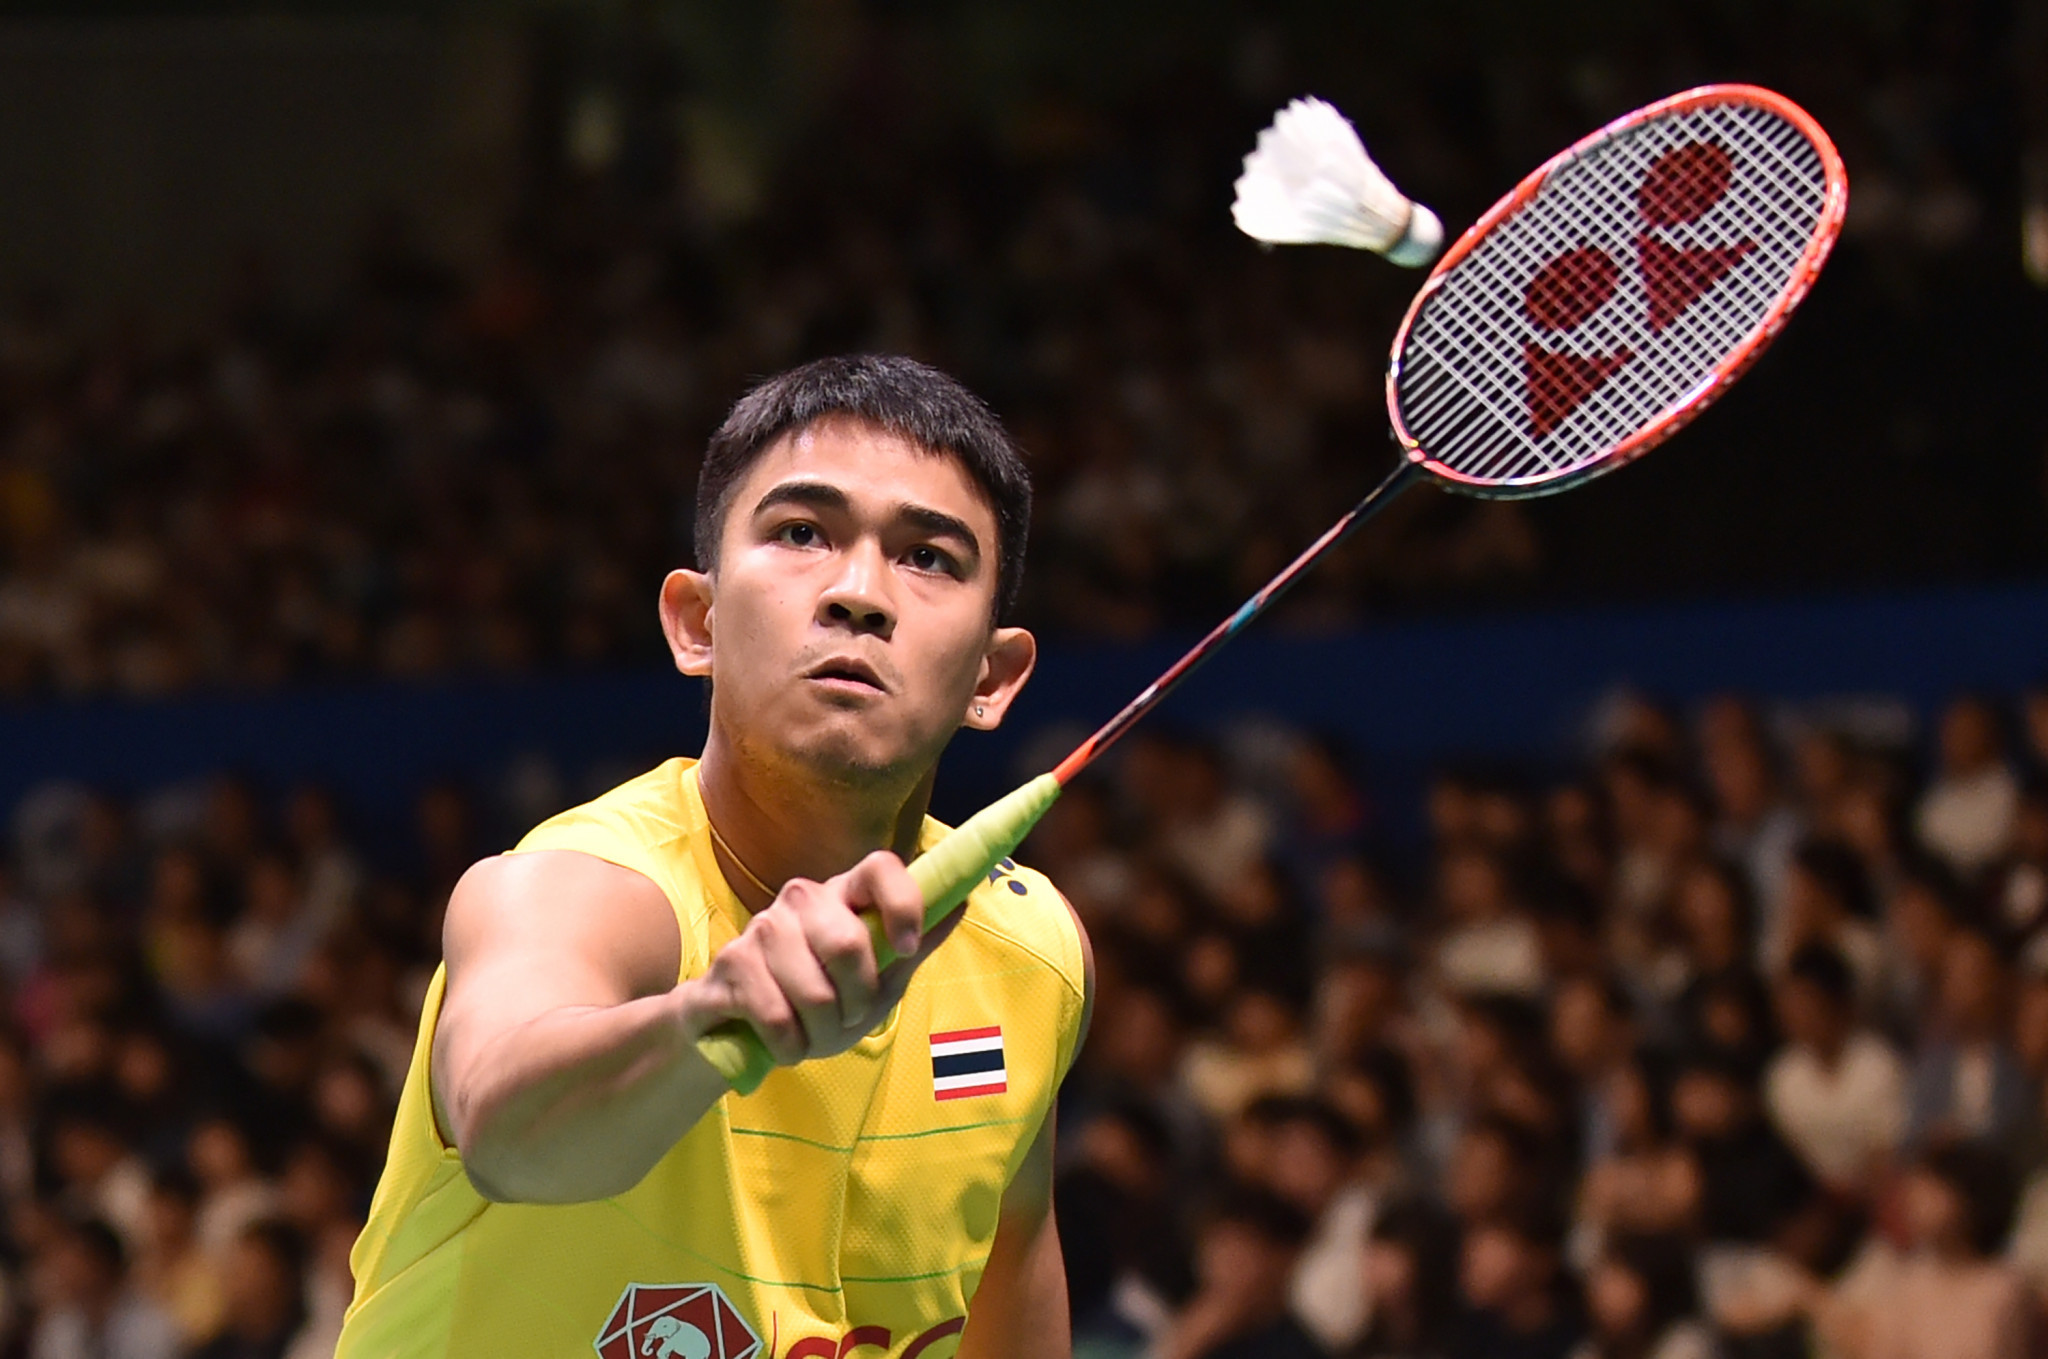 Thailand's Khosit Phetpradab reached the semi-finals of the U.S. Badminton Championships ©Getty Images